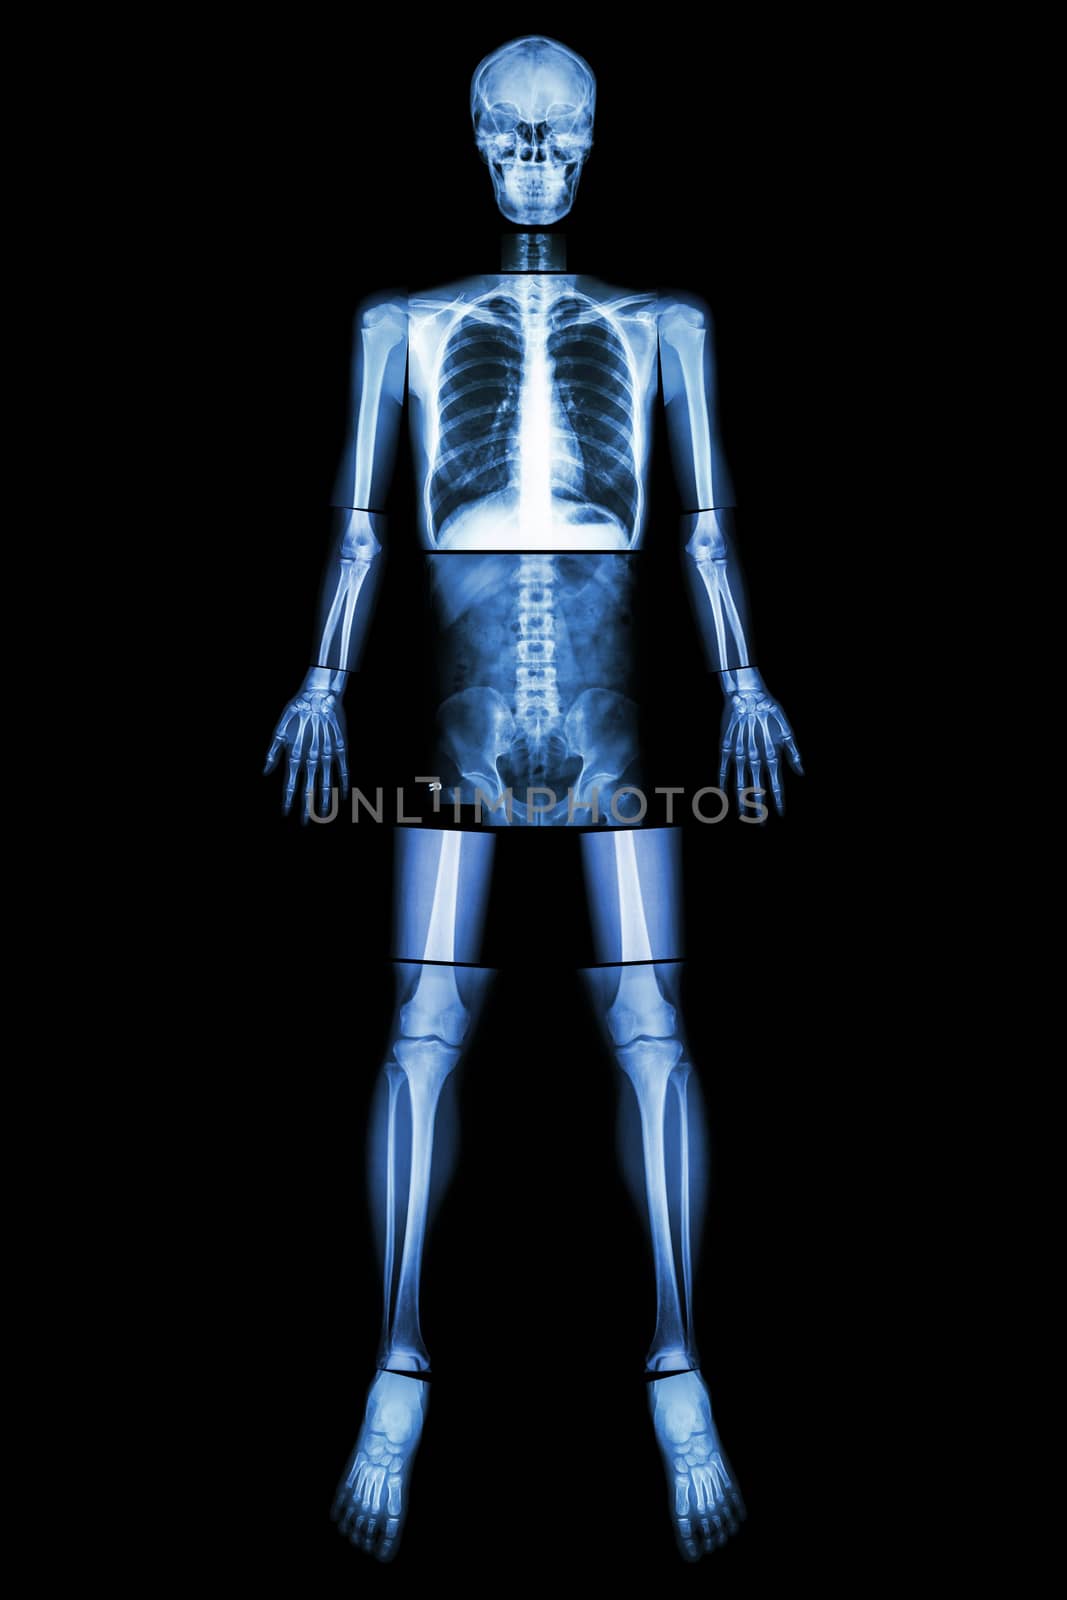 Anatomical Position. (X-ray whole body : head ,neck ,thorax ,heart ,lung ,rib ,shoulder ,scapula ,arm ,forearm ,elbow ,wrist ,hand ,digit ,abdomen ,hip ,pelvic ,leg ,thigh ,knee ,ankle ,heel ,foot ) by stockdevil